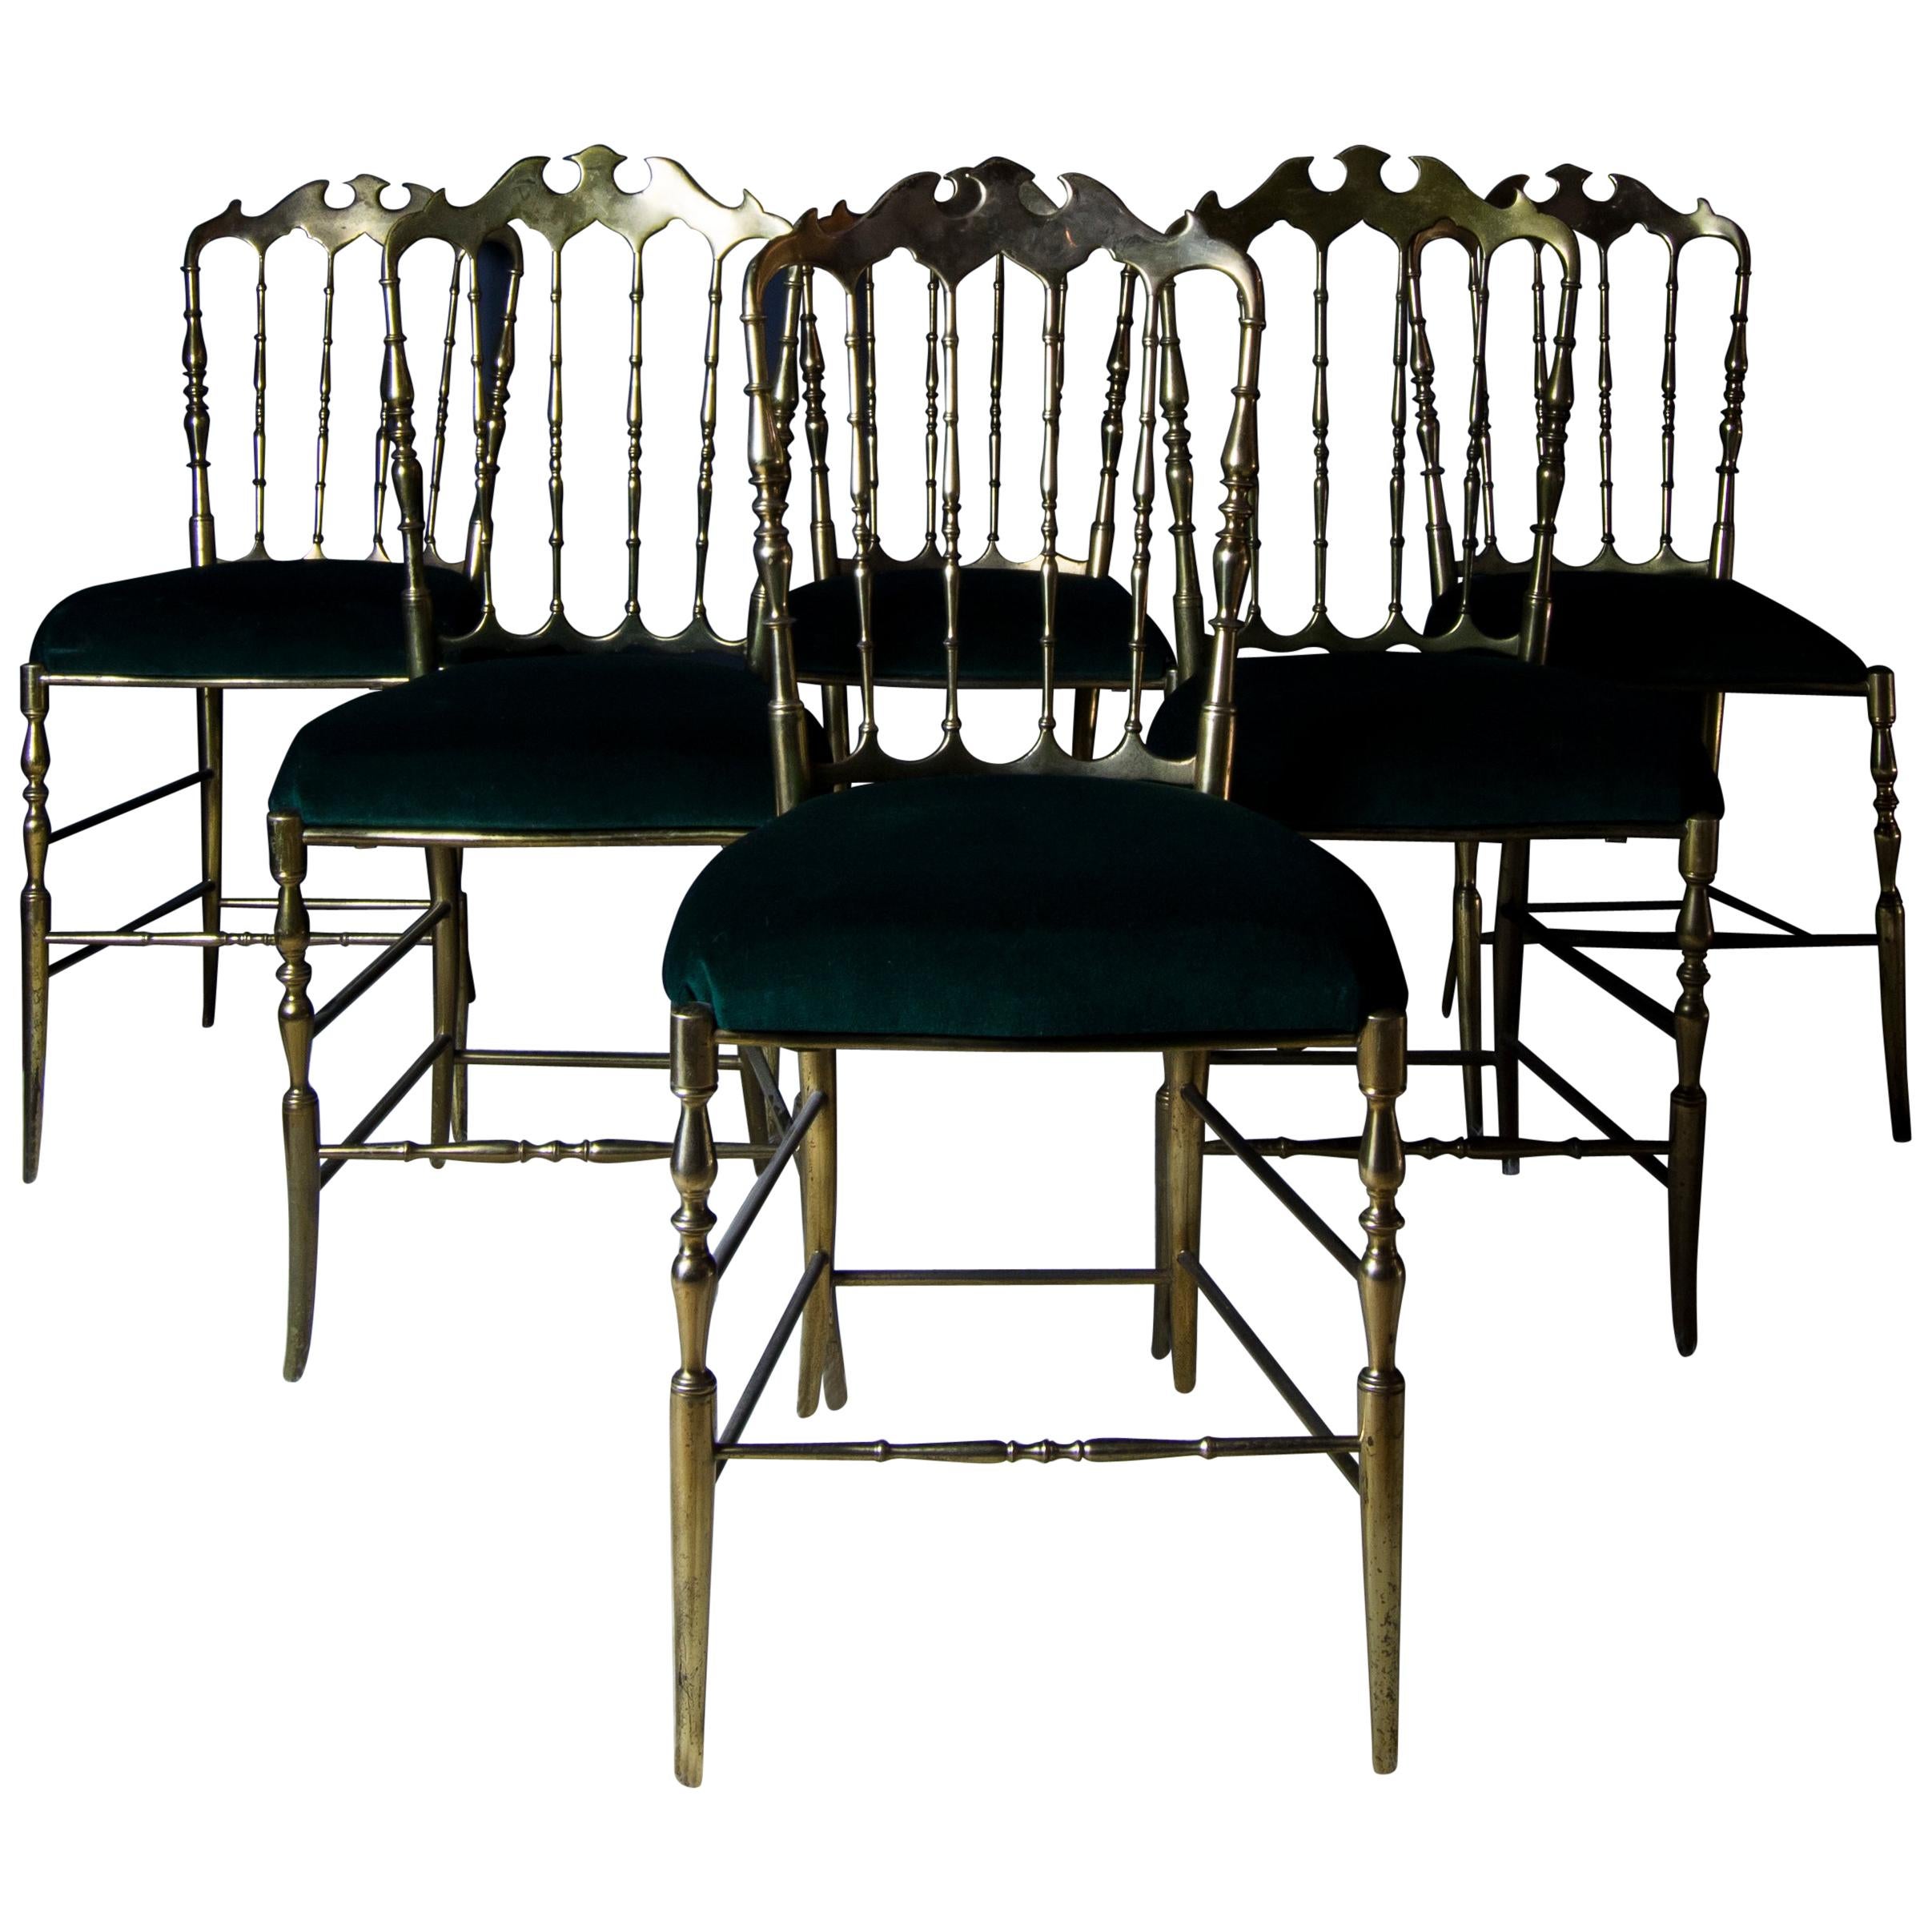 Original Chiavari chairs made in Italy believed to be circa 1952. Set of six chairs. Each beautifully detailed with turned legs and each one an individual. Stamped Made in Italy.


Some patina as would be expected with these original